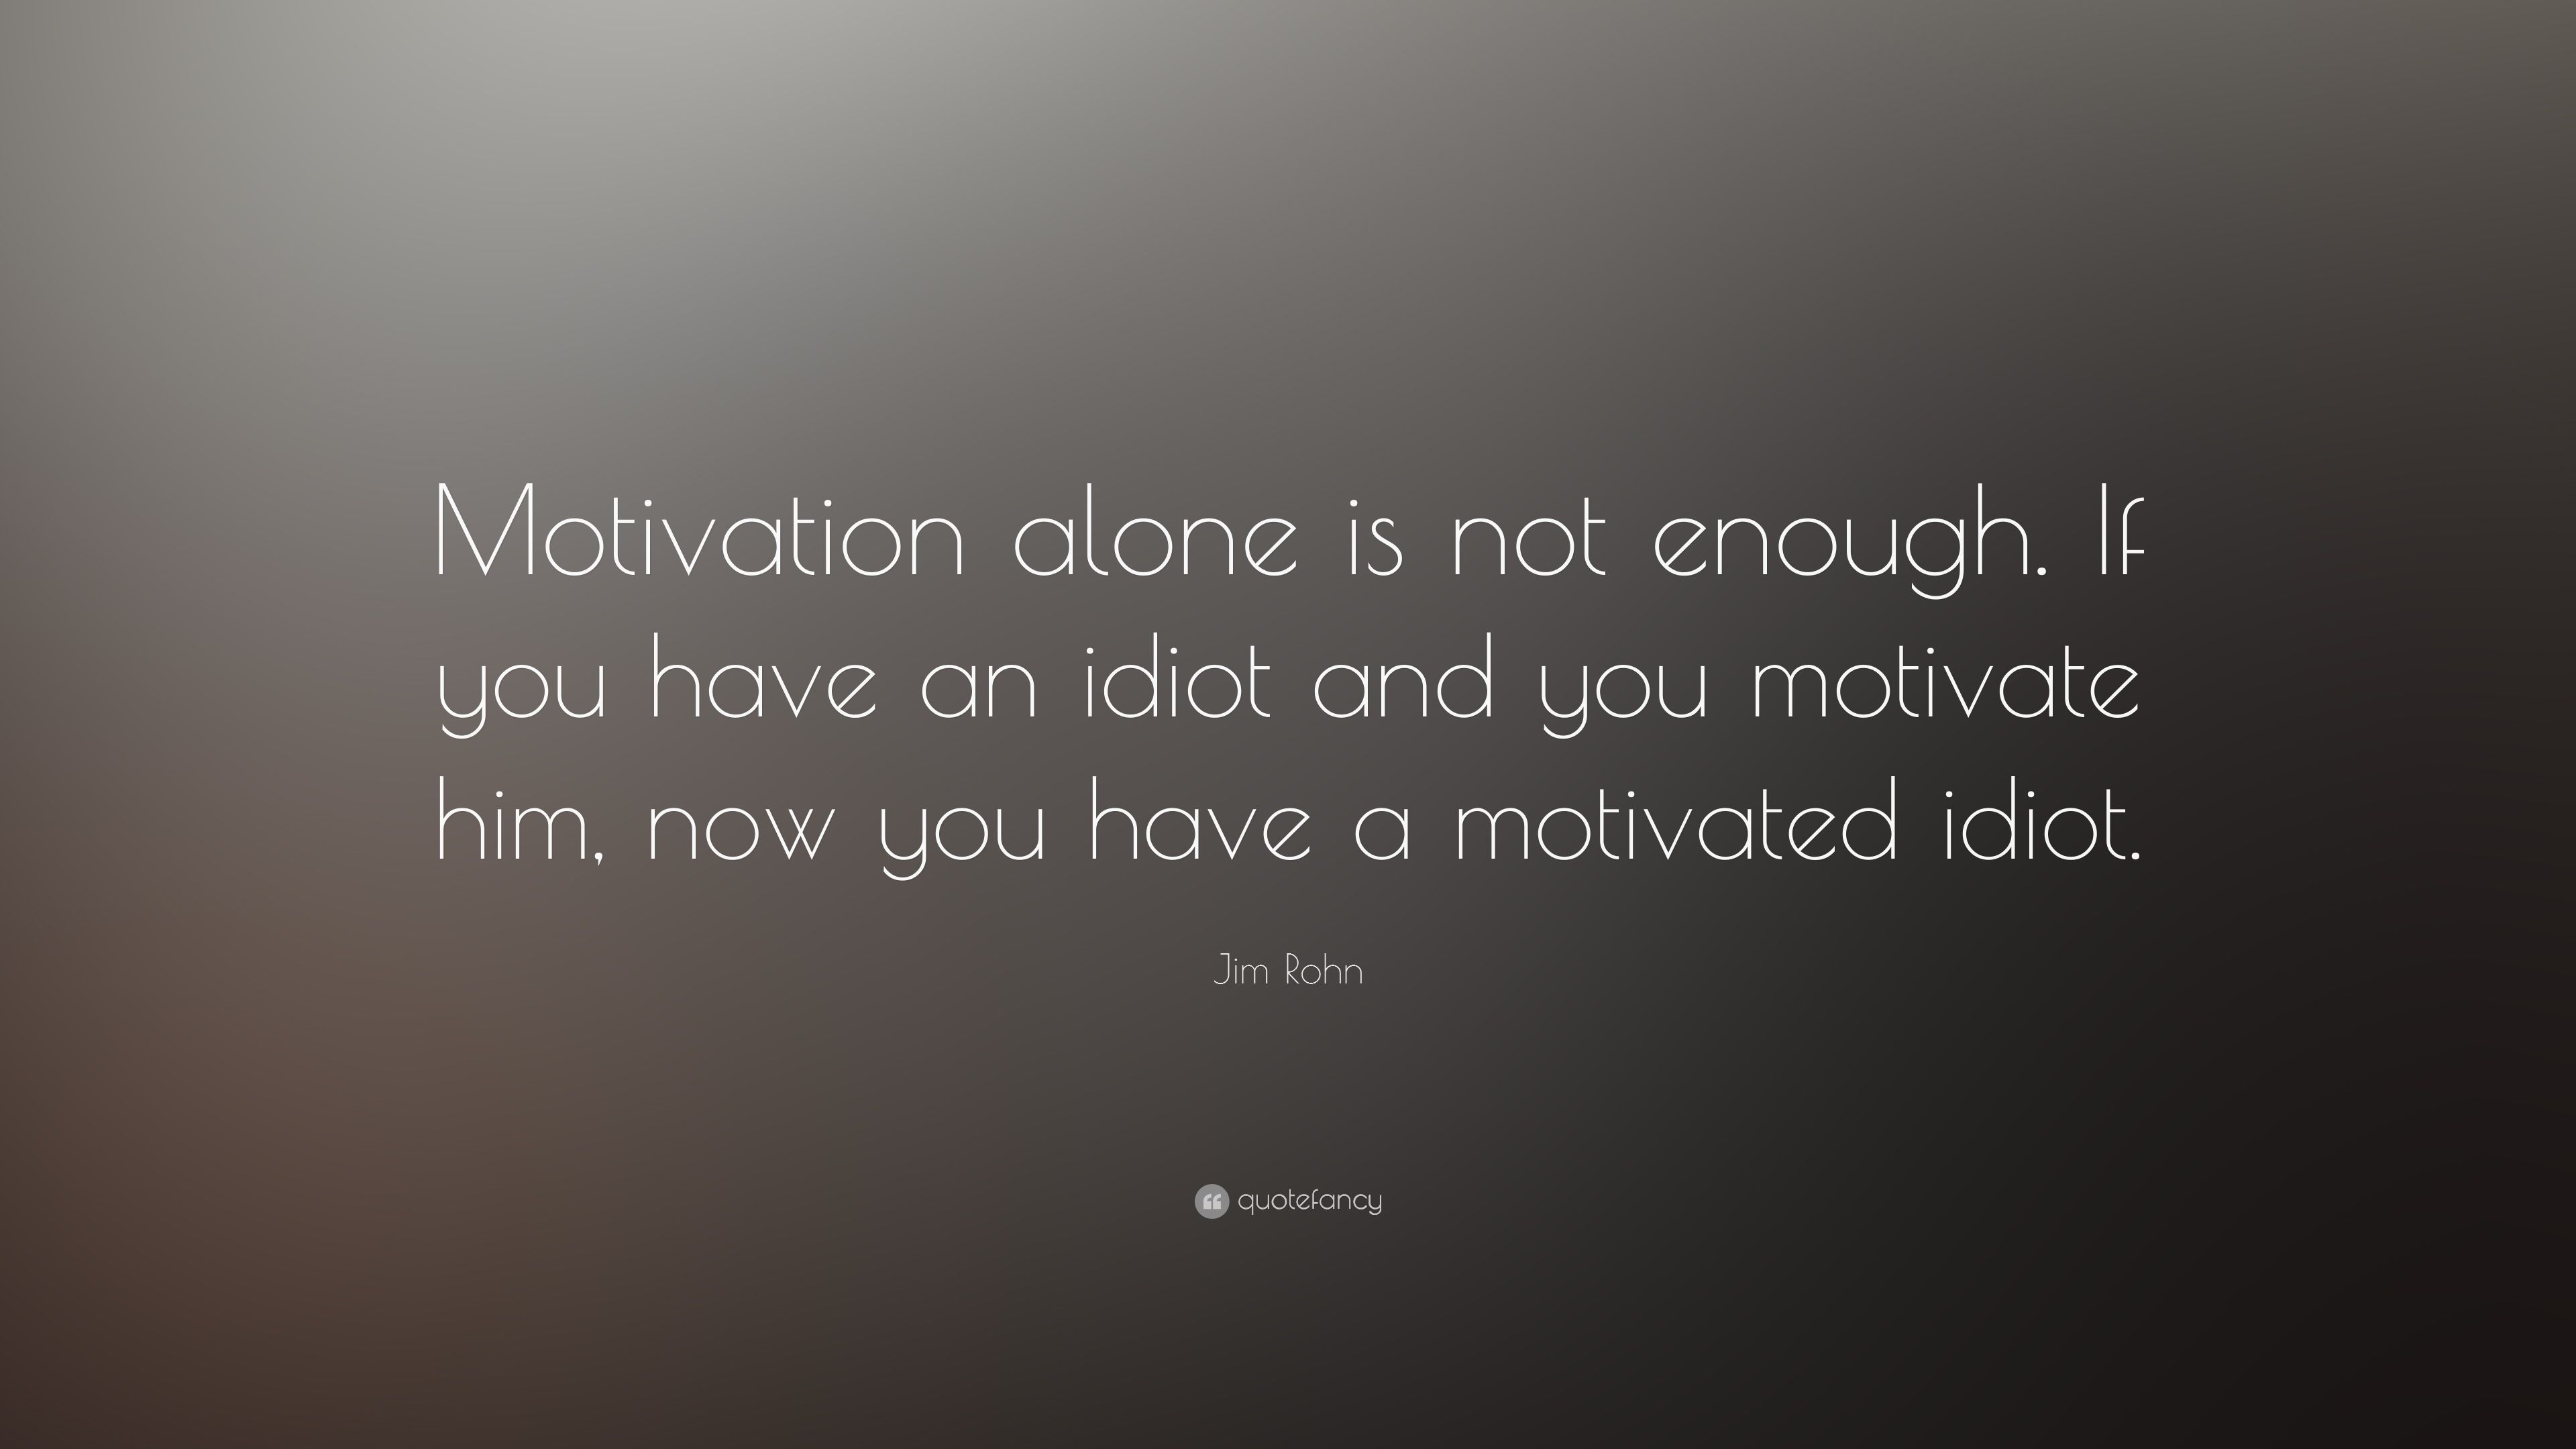 Jim Rohn Quote: “Motivation alone is not enough. If you have an